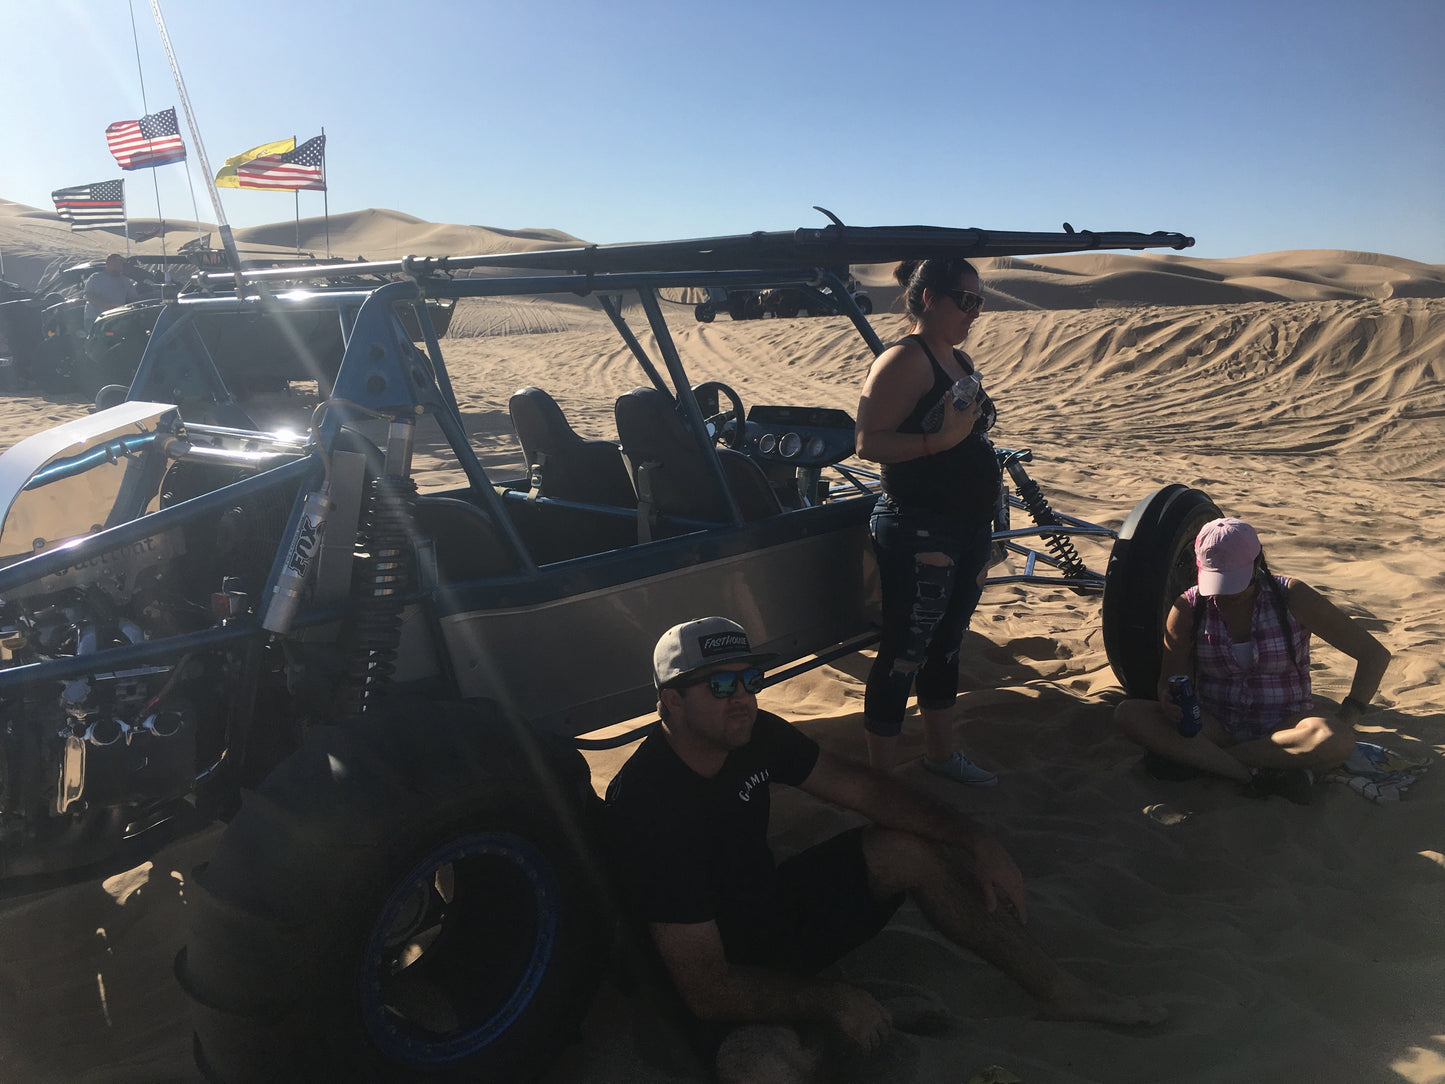 Sir-Shade™ Telescoping Awning System for Sand Cars